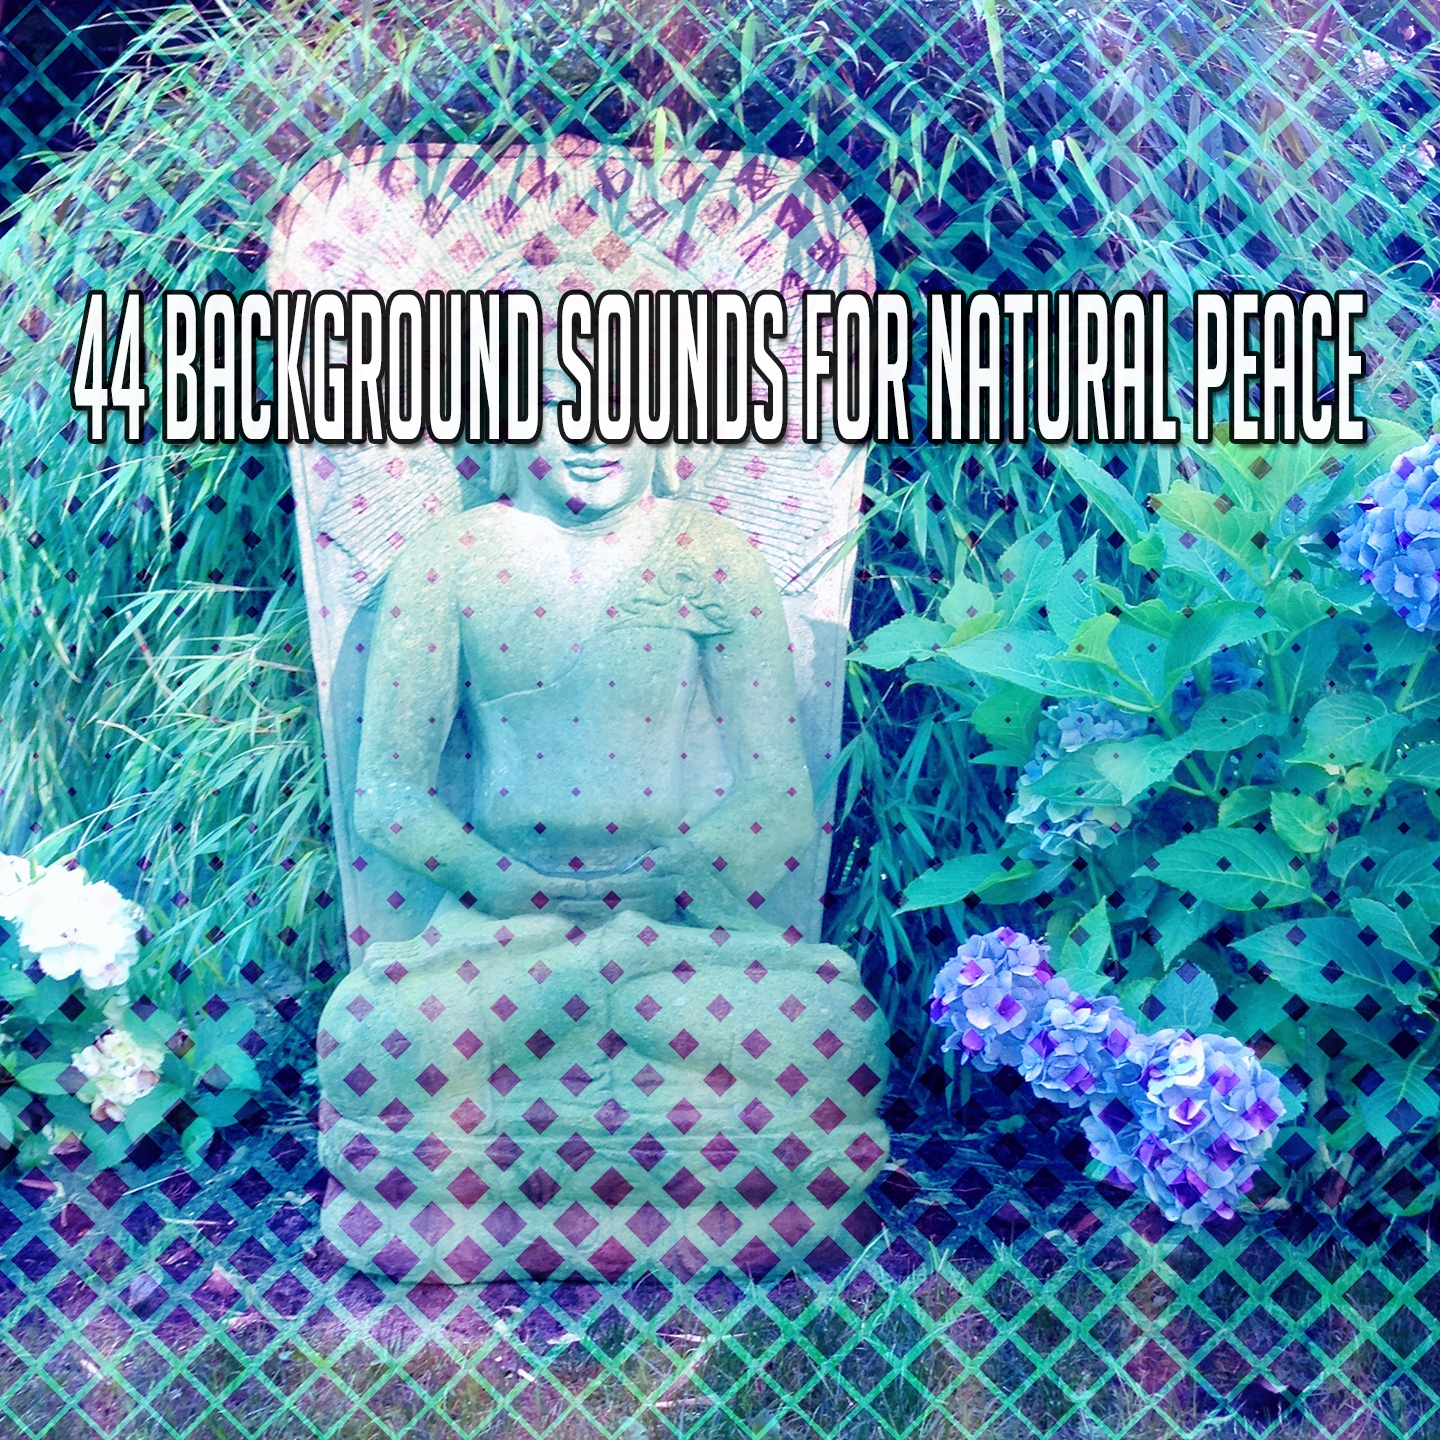 44 Background Sounds For Natural Peace